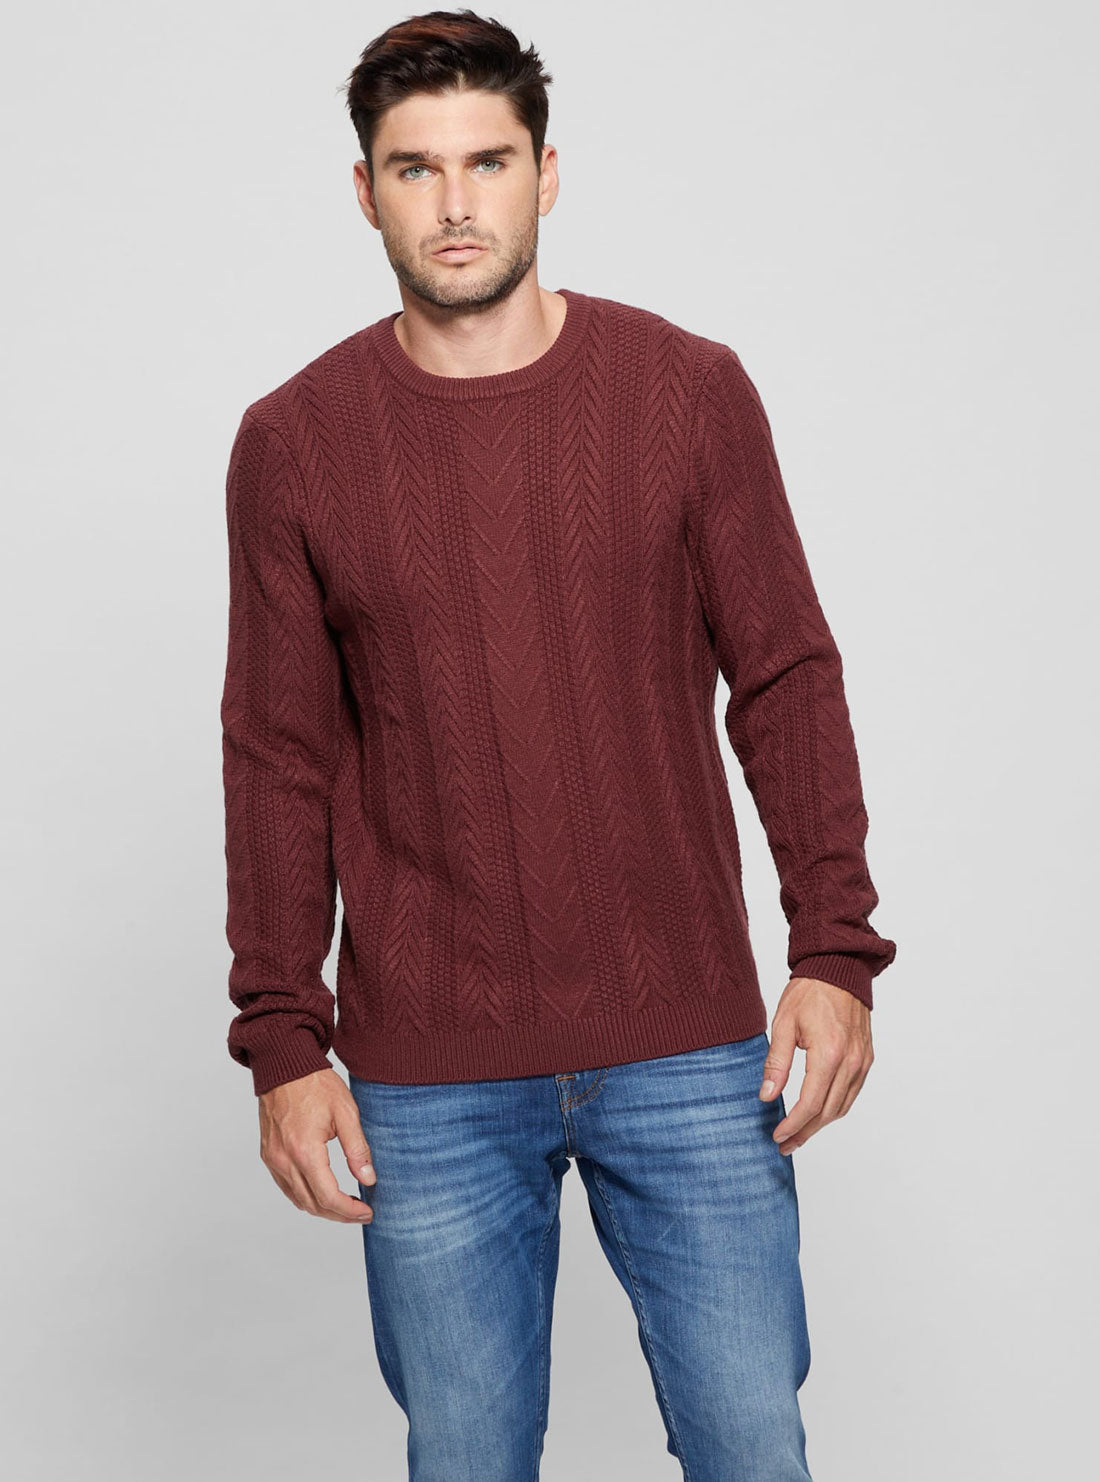 Maroon Red Cable Ethan Knit Top | GUESS Men's Apparel | Front view